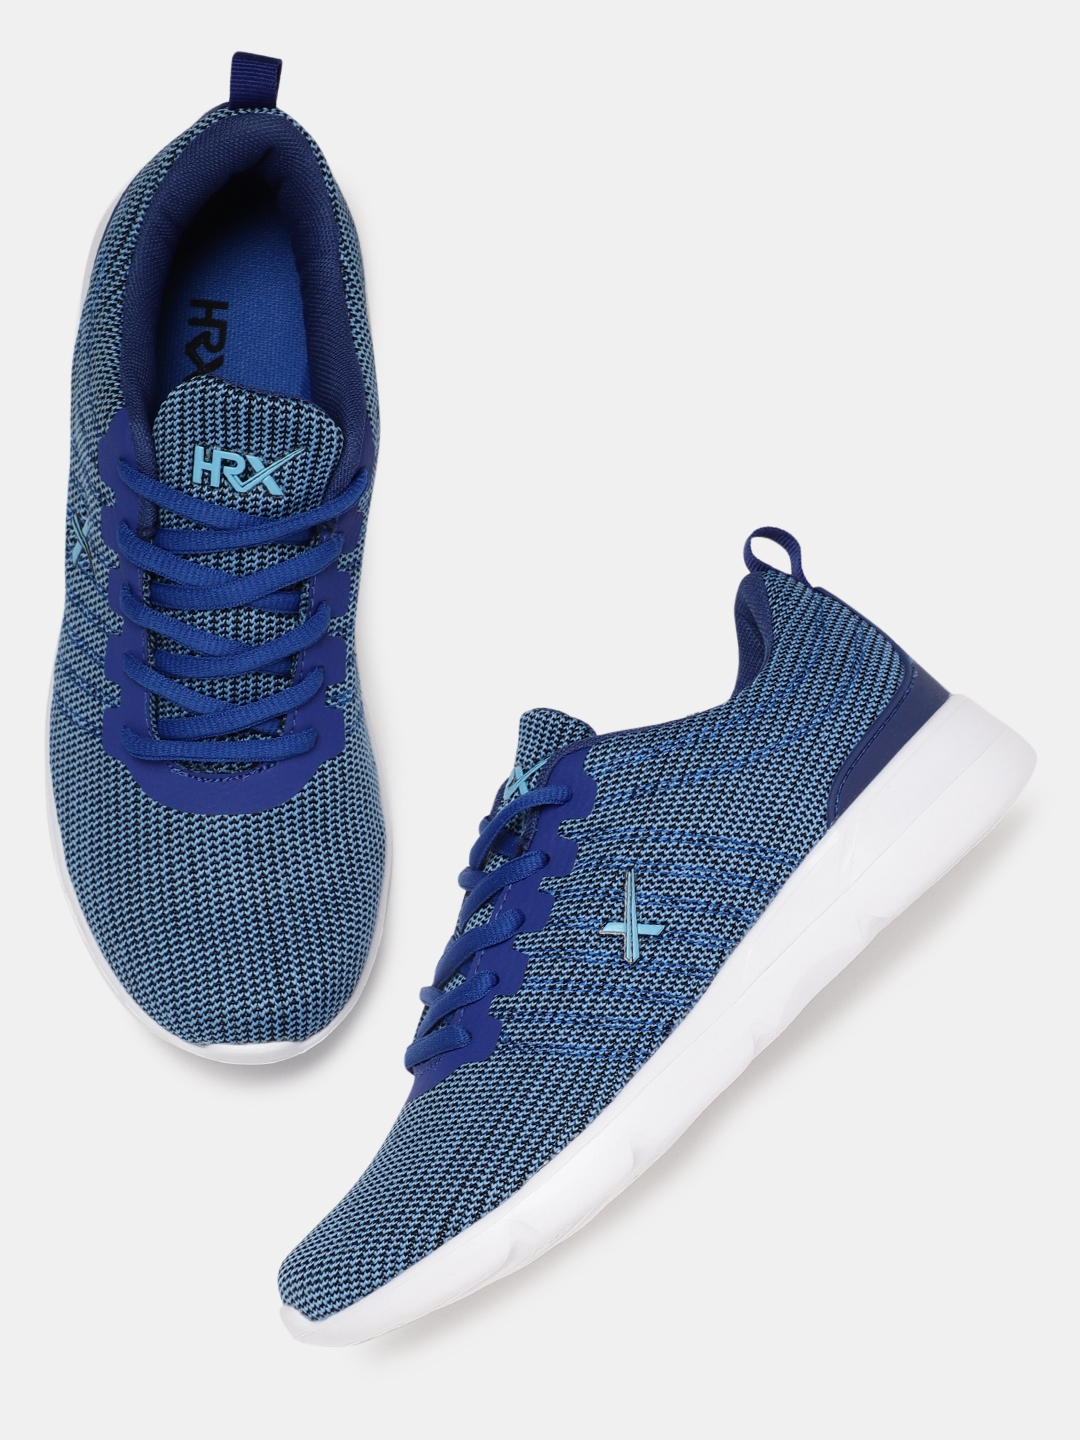 For 979/-(65% Off) HRX by Hrithik Roshan Women Blue Knit Run 1.0 Shoes at Myntra